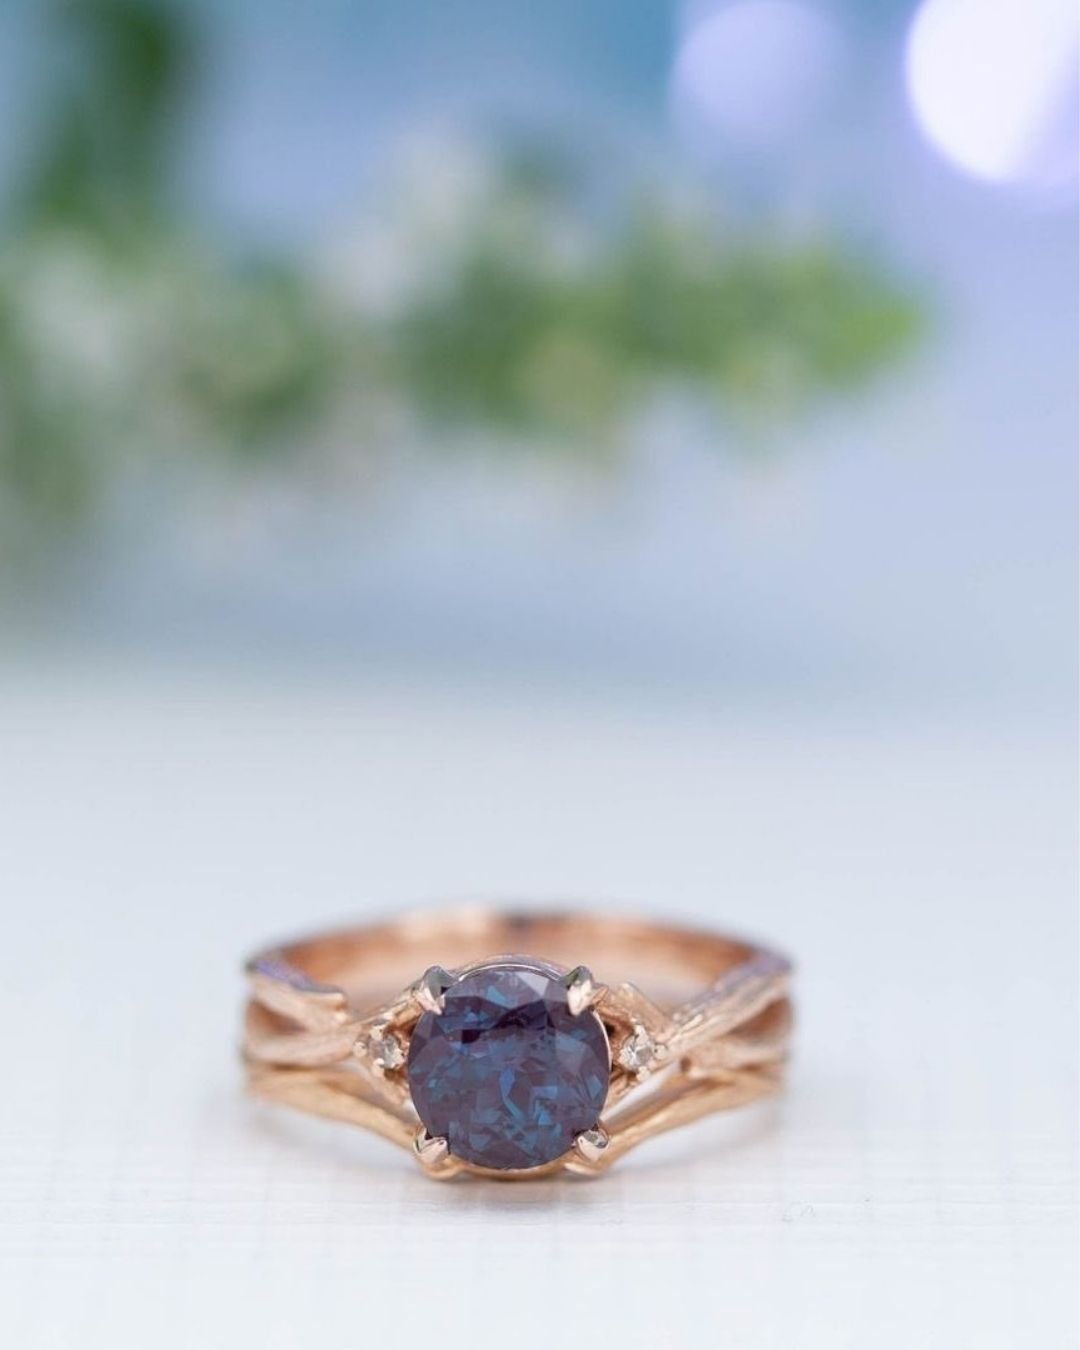 opal engagement rings in vintage style1